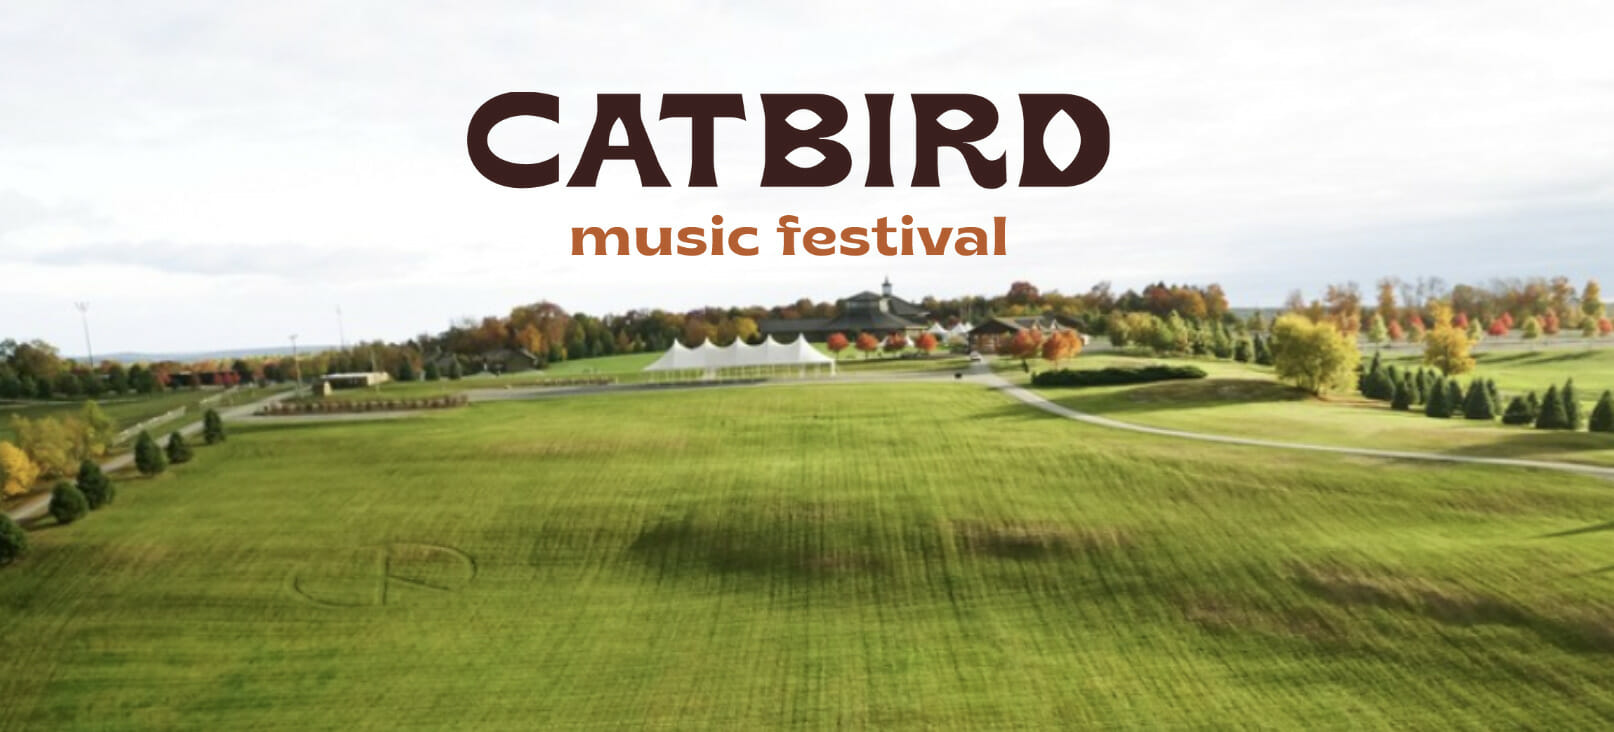 Catbird Music Festival Details Inaugural Lineup Set for Historic